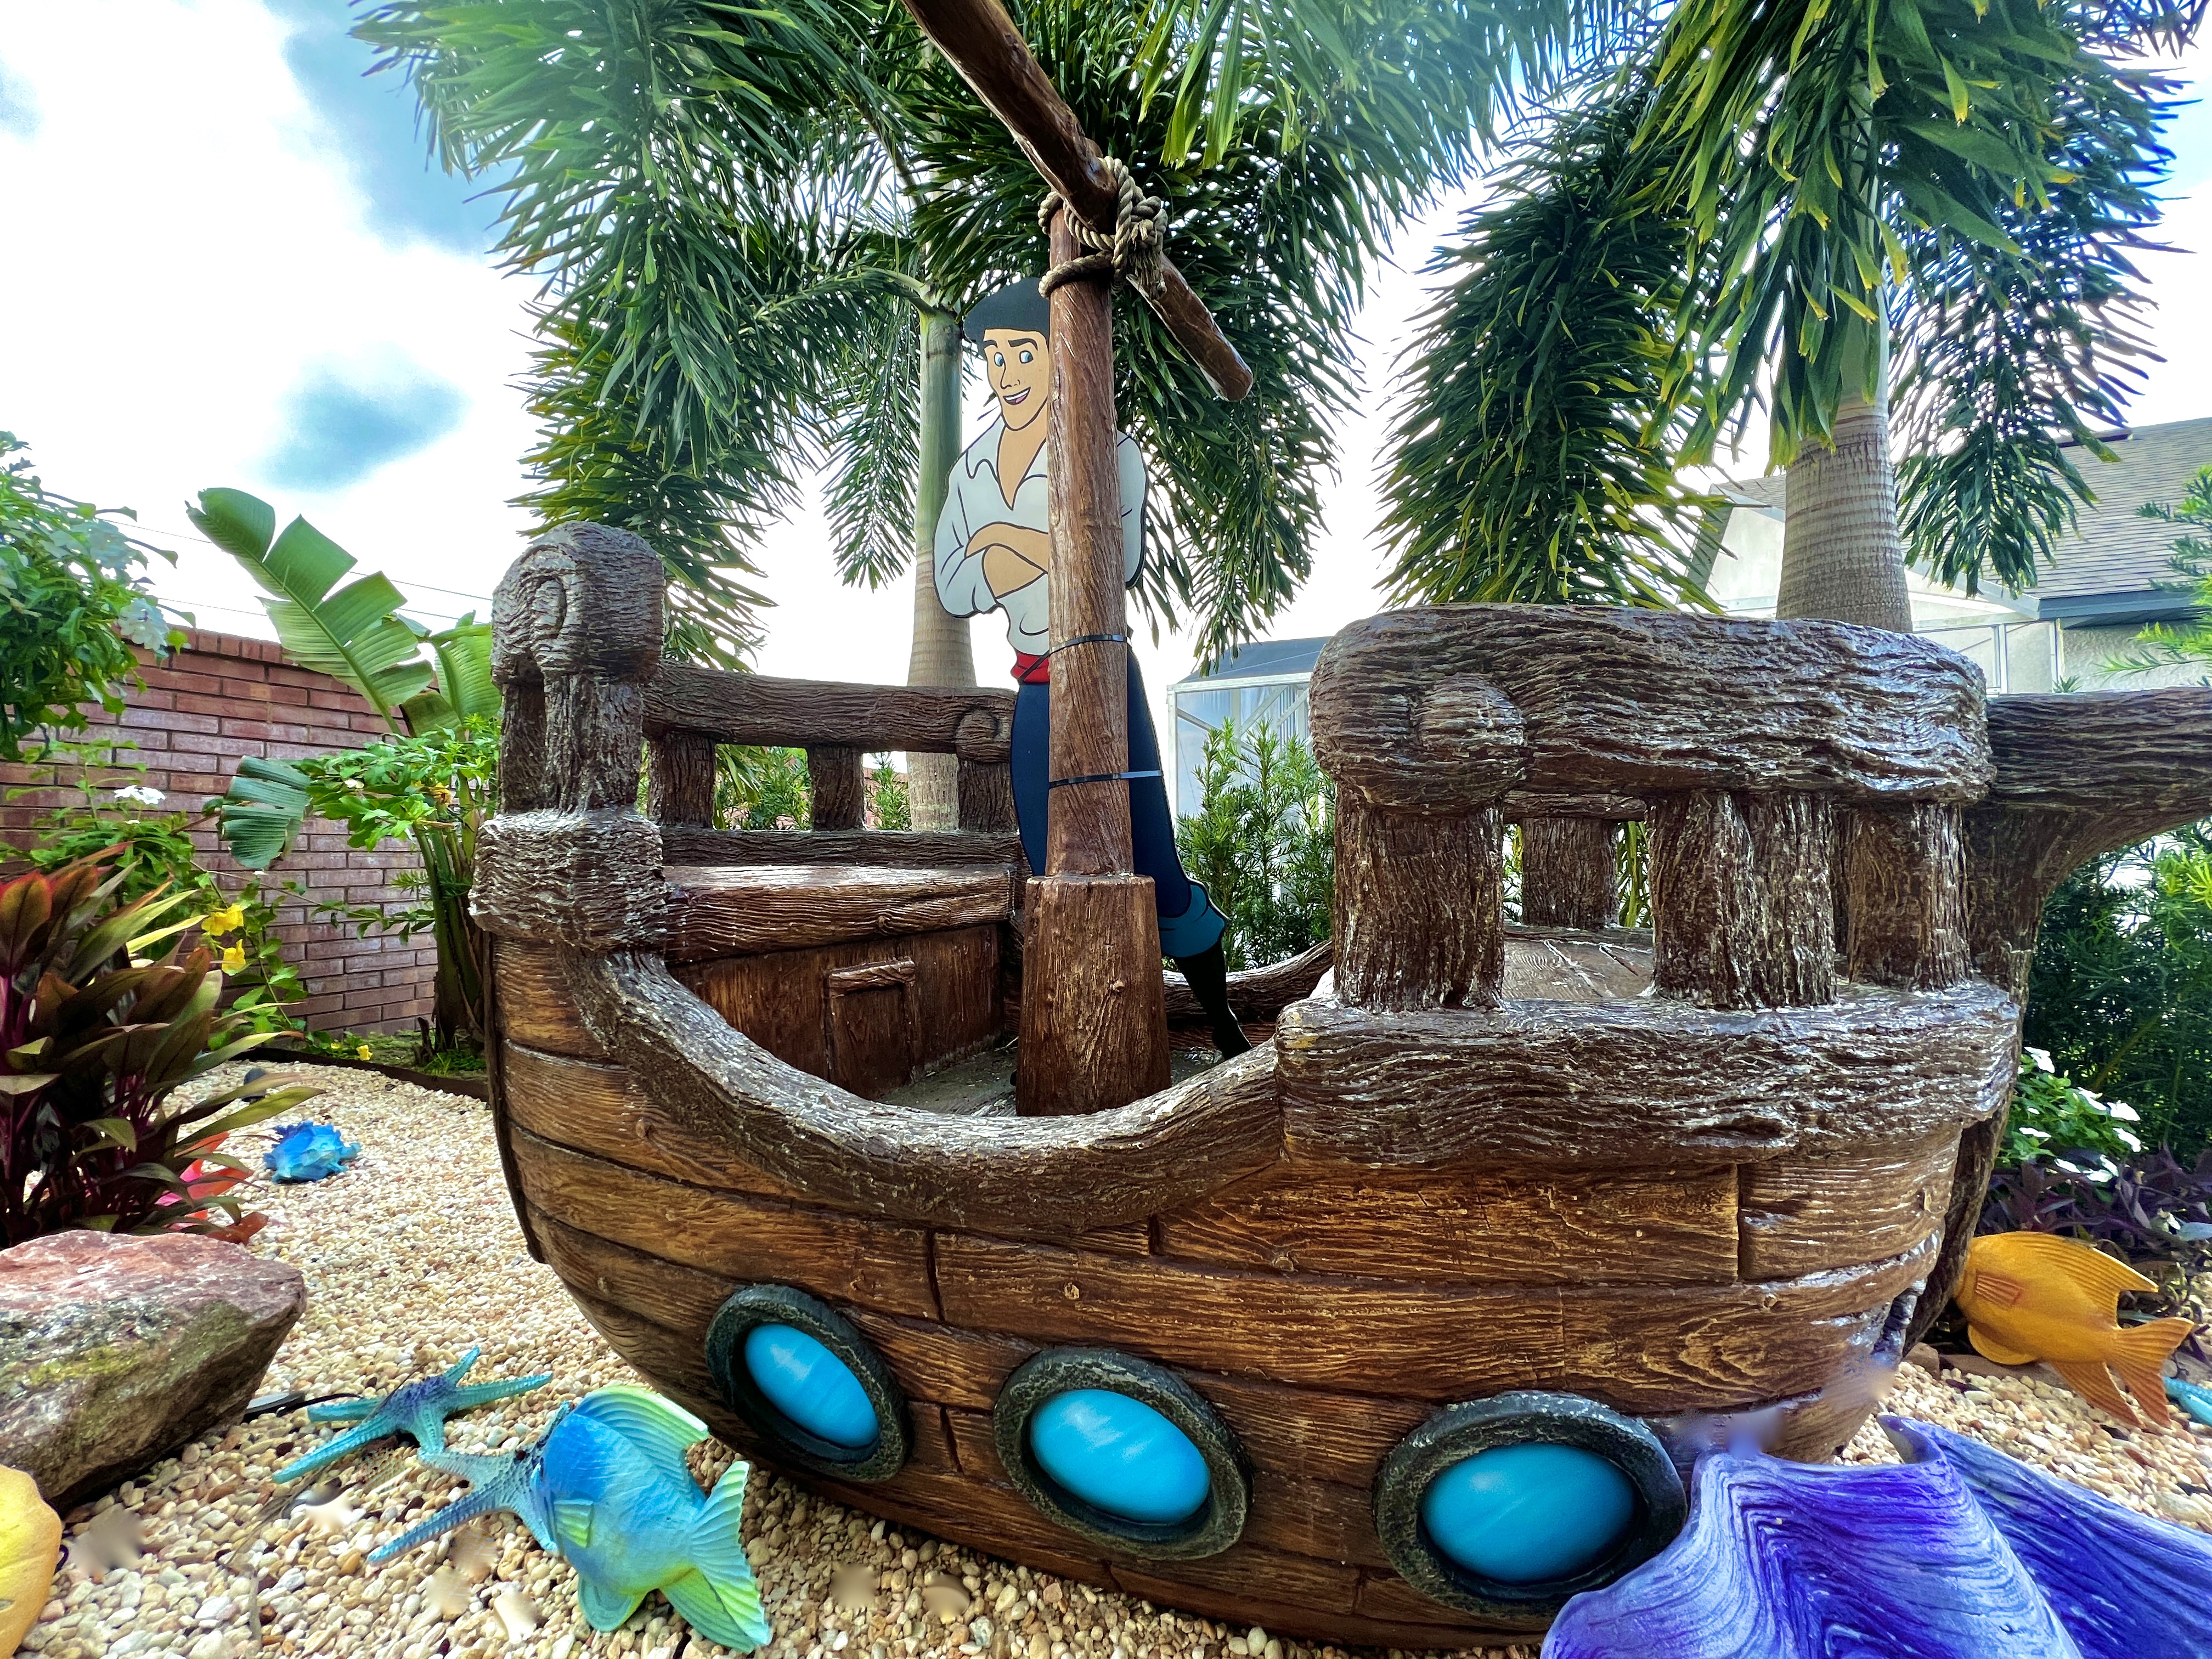 Send the kids outdoors for play adventures and pictures on Prince Eric's shipwrecked boat!